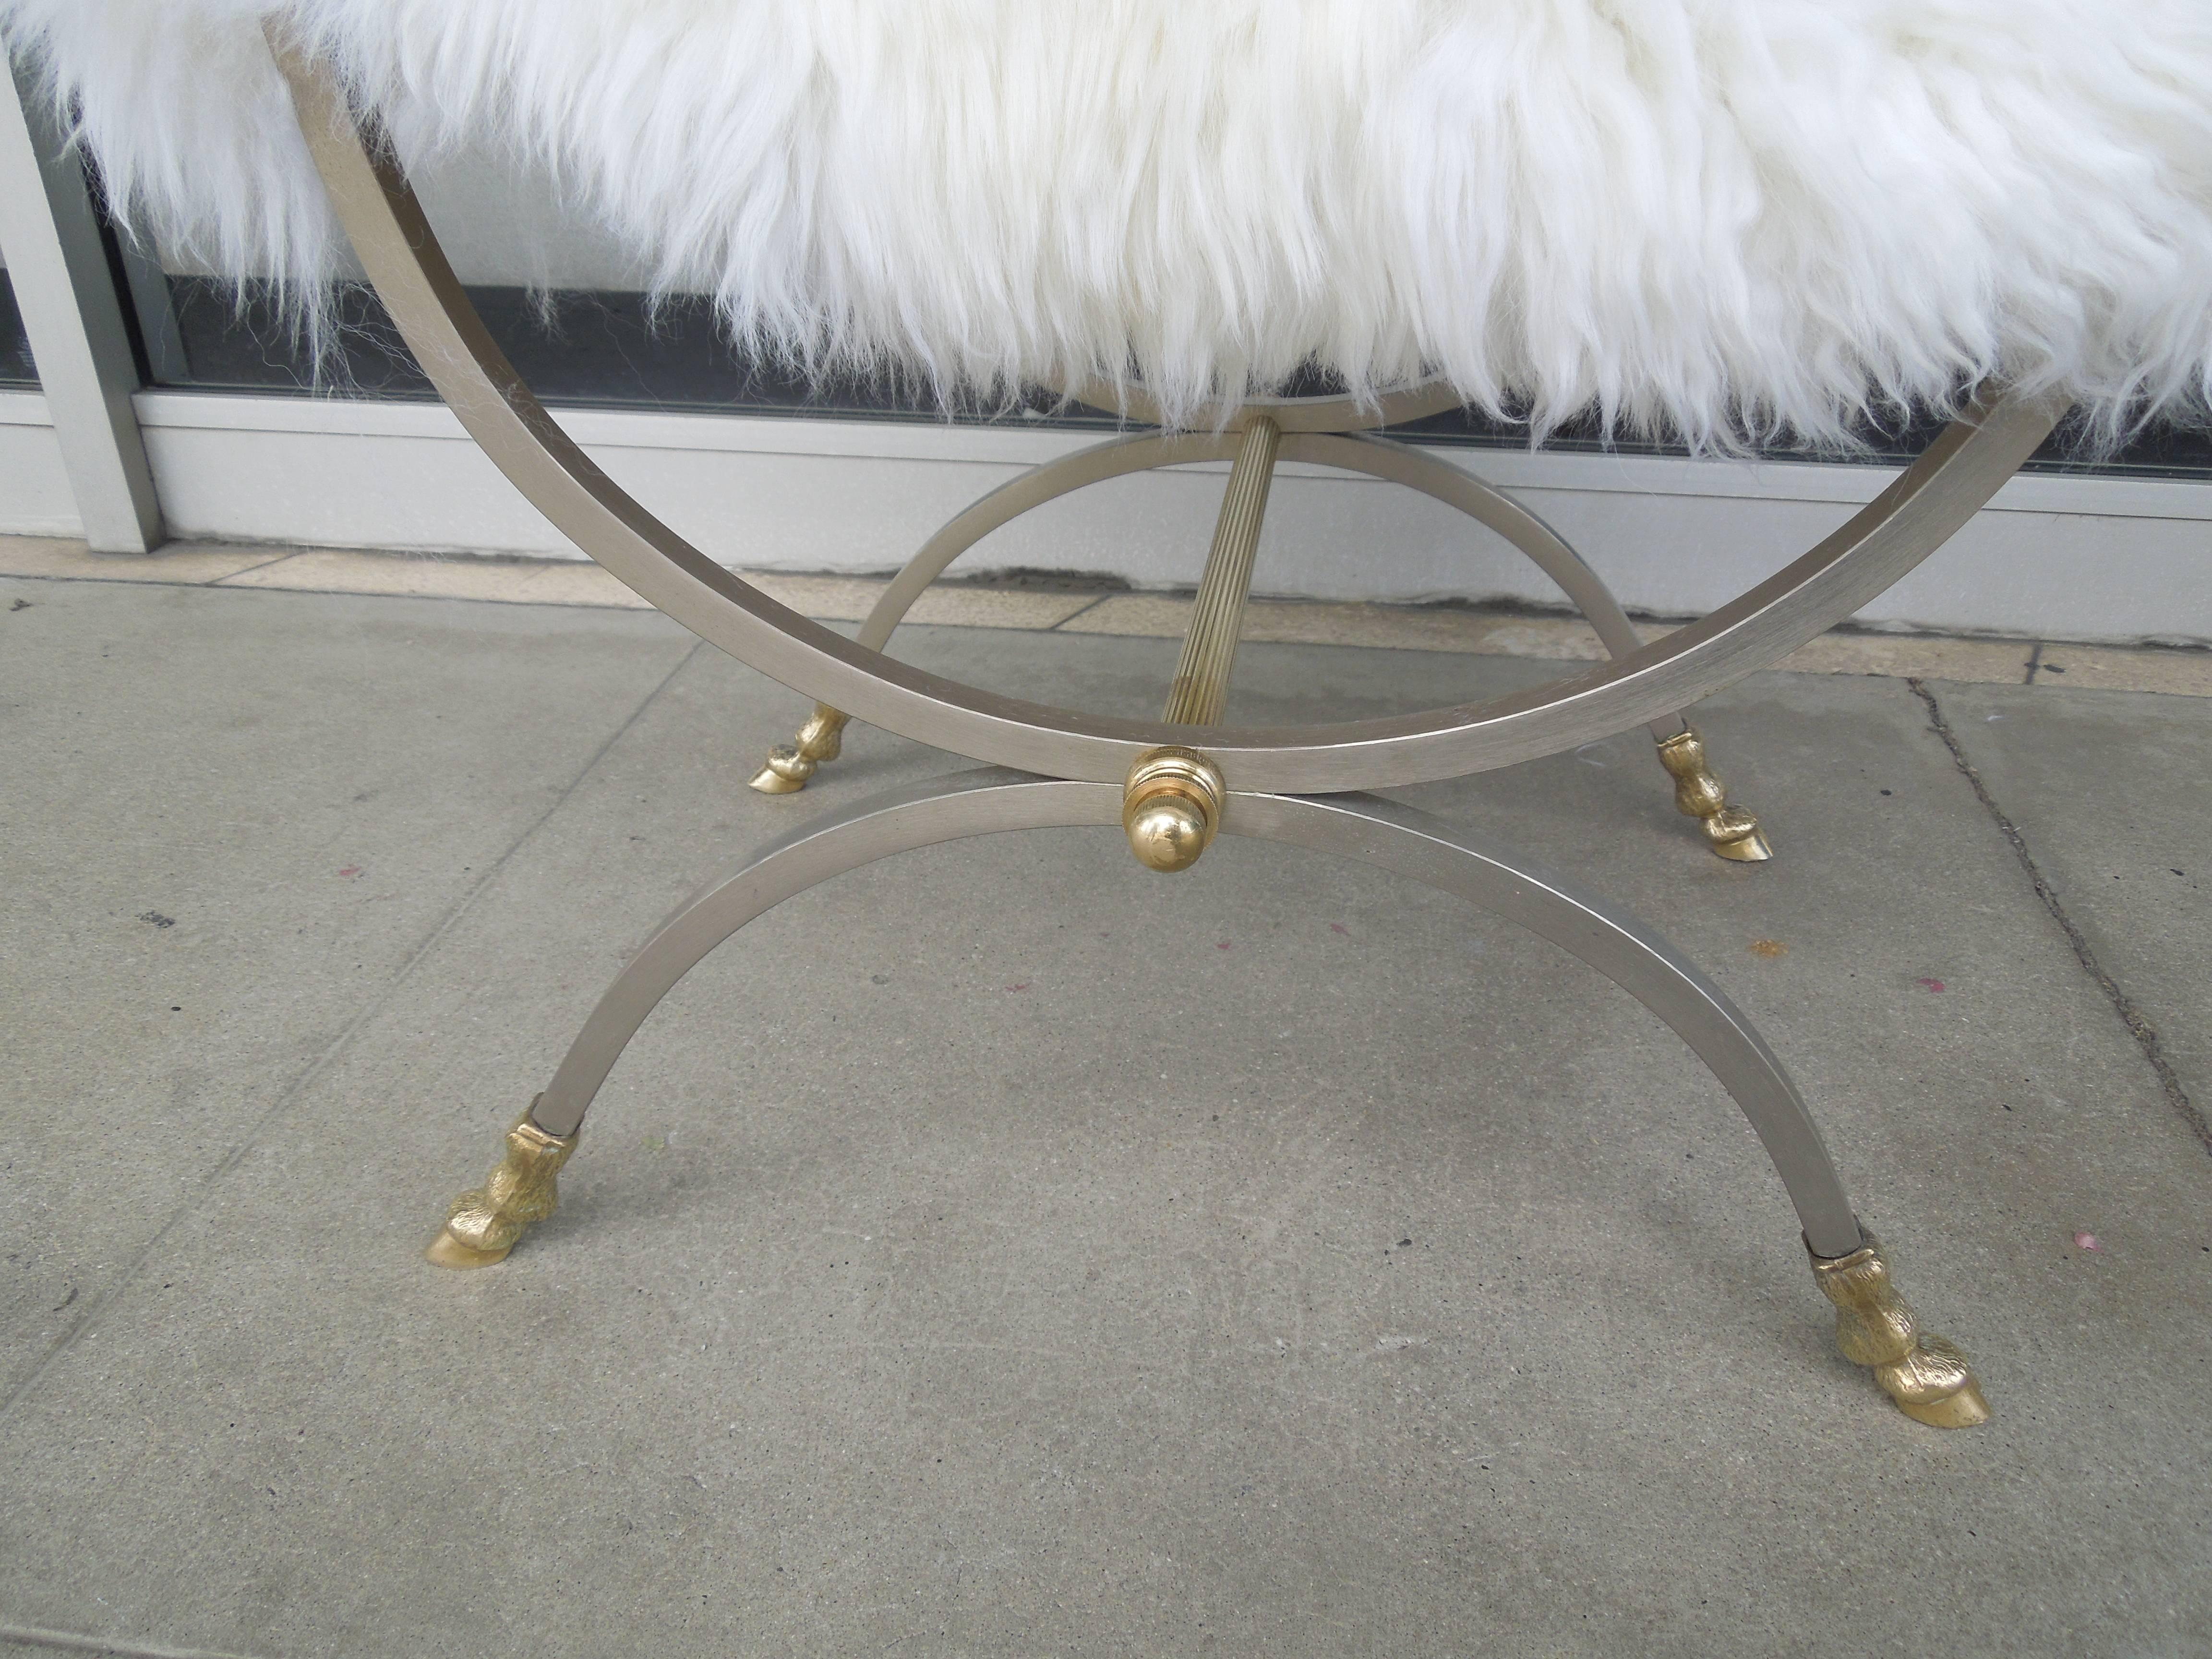 A very chic French Directoire style bench very much in the style of Jansen. From an Architecturally significant Palm Springs Estate. Made in Italy, in nickel and brass, the bench obtains original thick white leather seat. Have added a new off-white